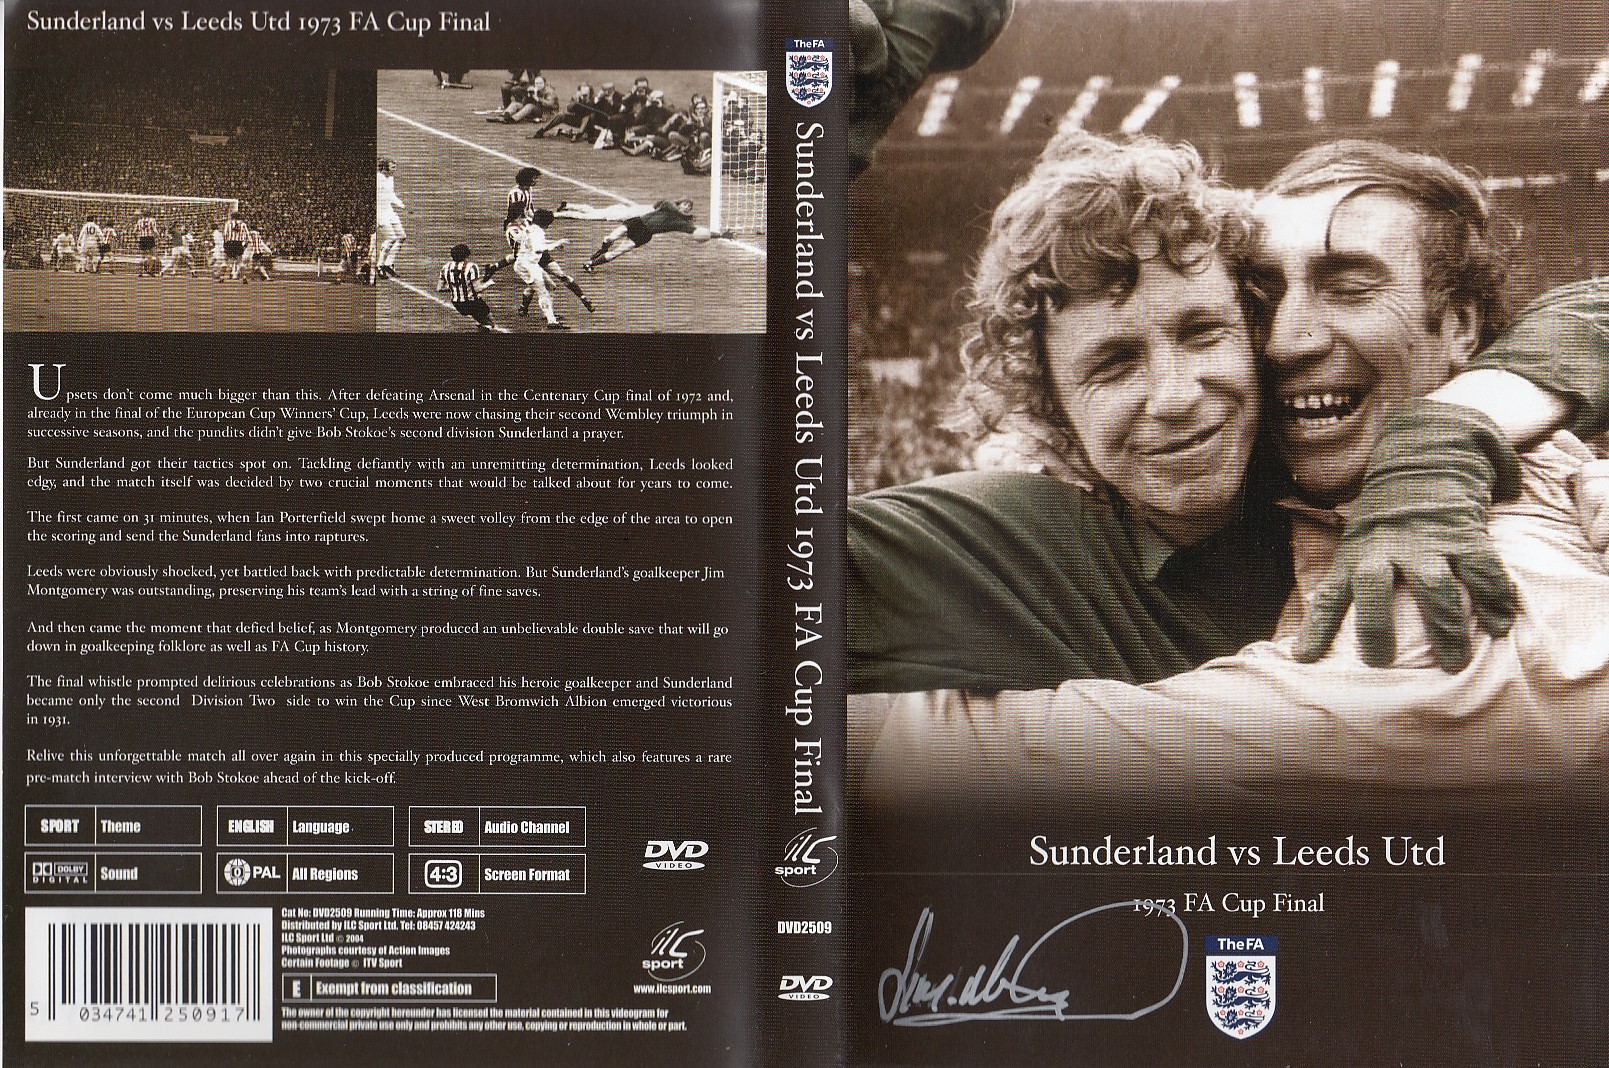 Autographed DVD 1973 FA CUP FINAL : New and unwatched DVD depicting the 1973 FA Cup Final, Leeds